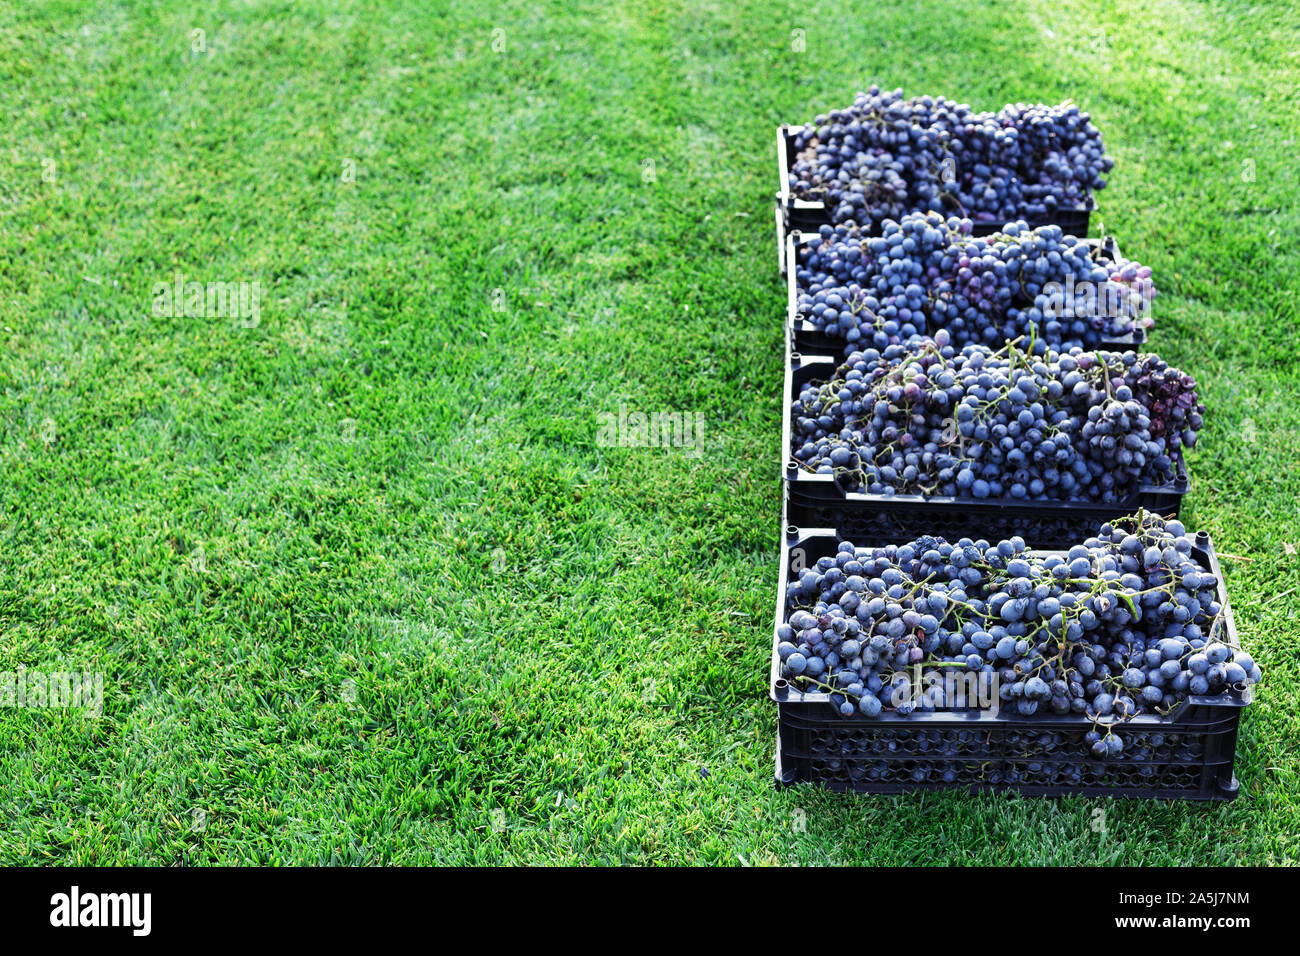 Baskets of Ripe bunches of black grapes outdoors. Autumn grapes harvest in vineyard on grass ready to delivery for wine making. Pinot Noir grape sort Stock Photo